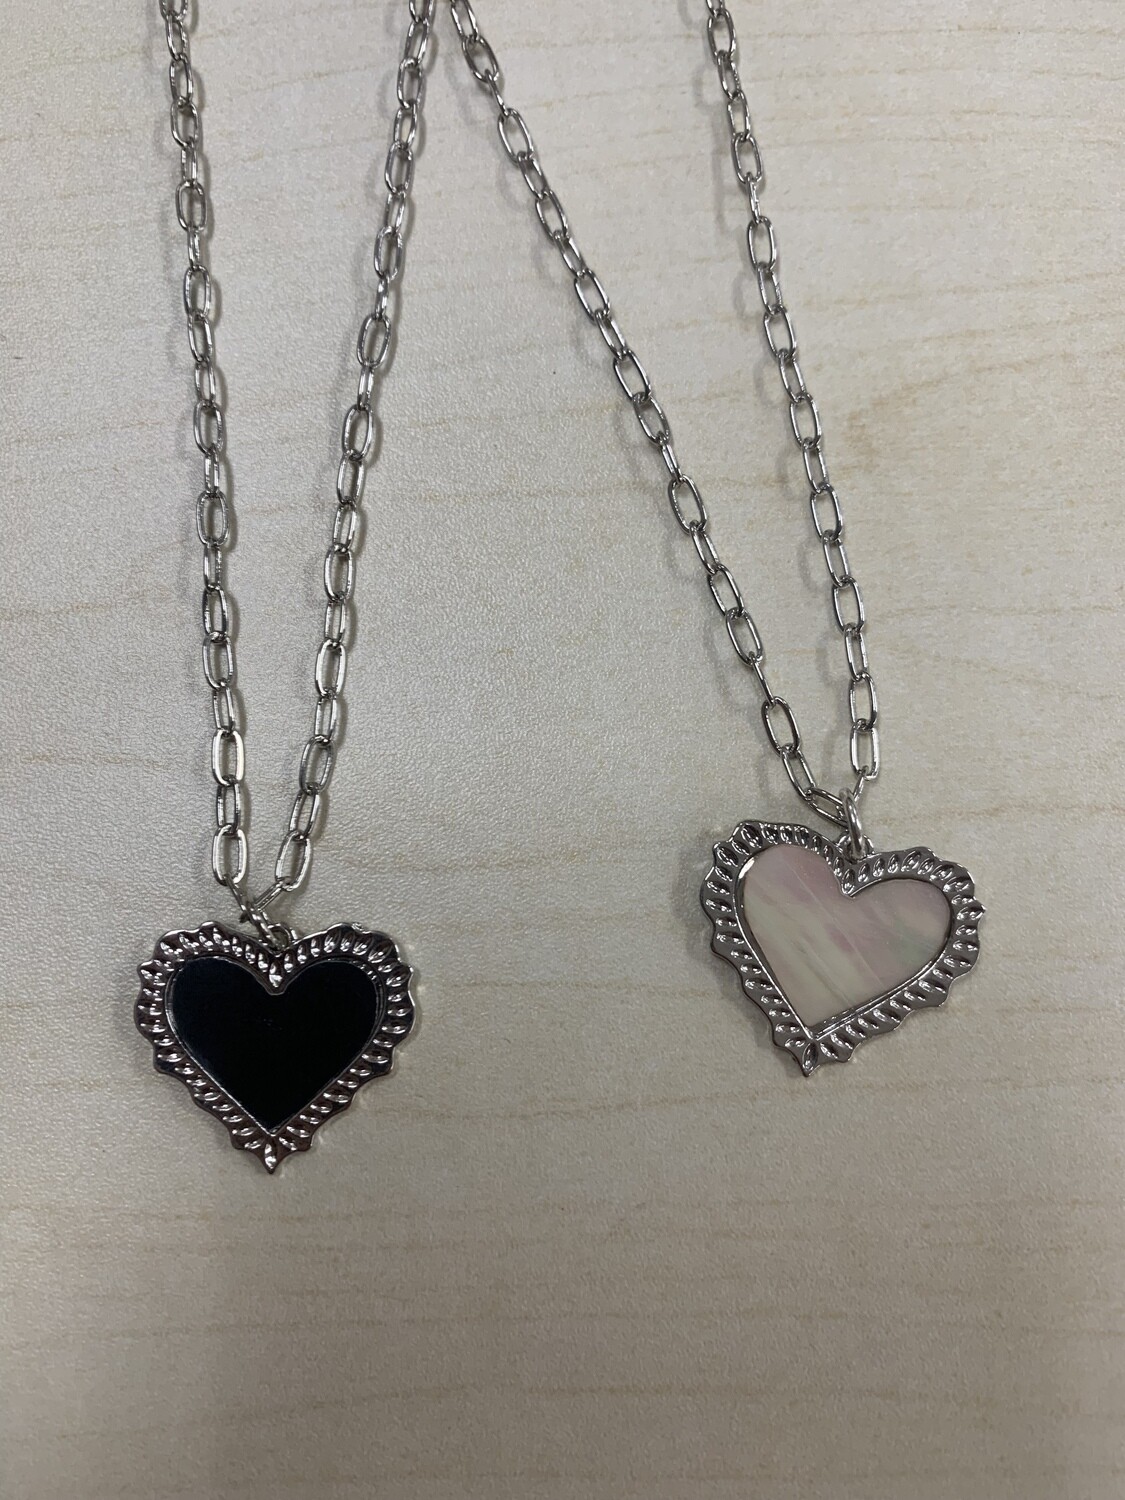 Silver Chain Necklace with Heart Pendant